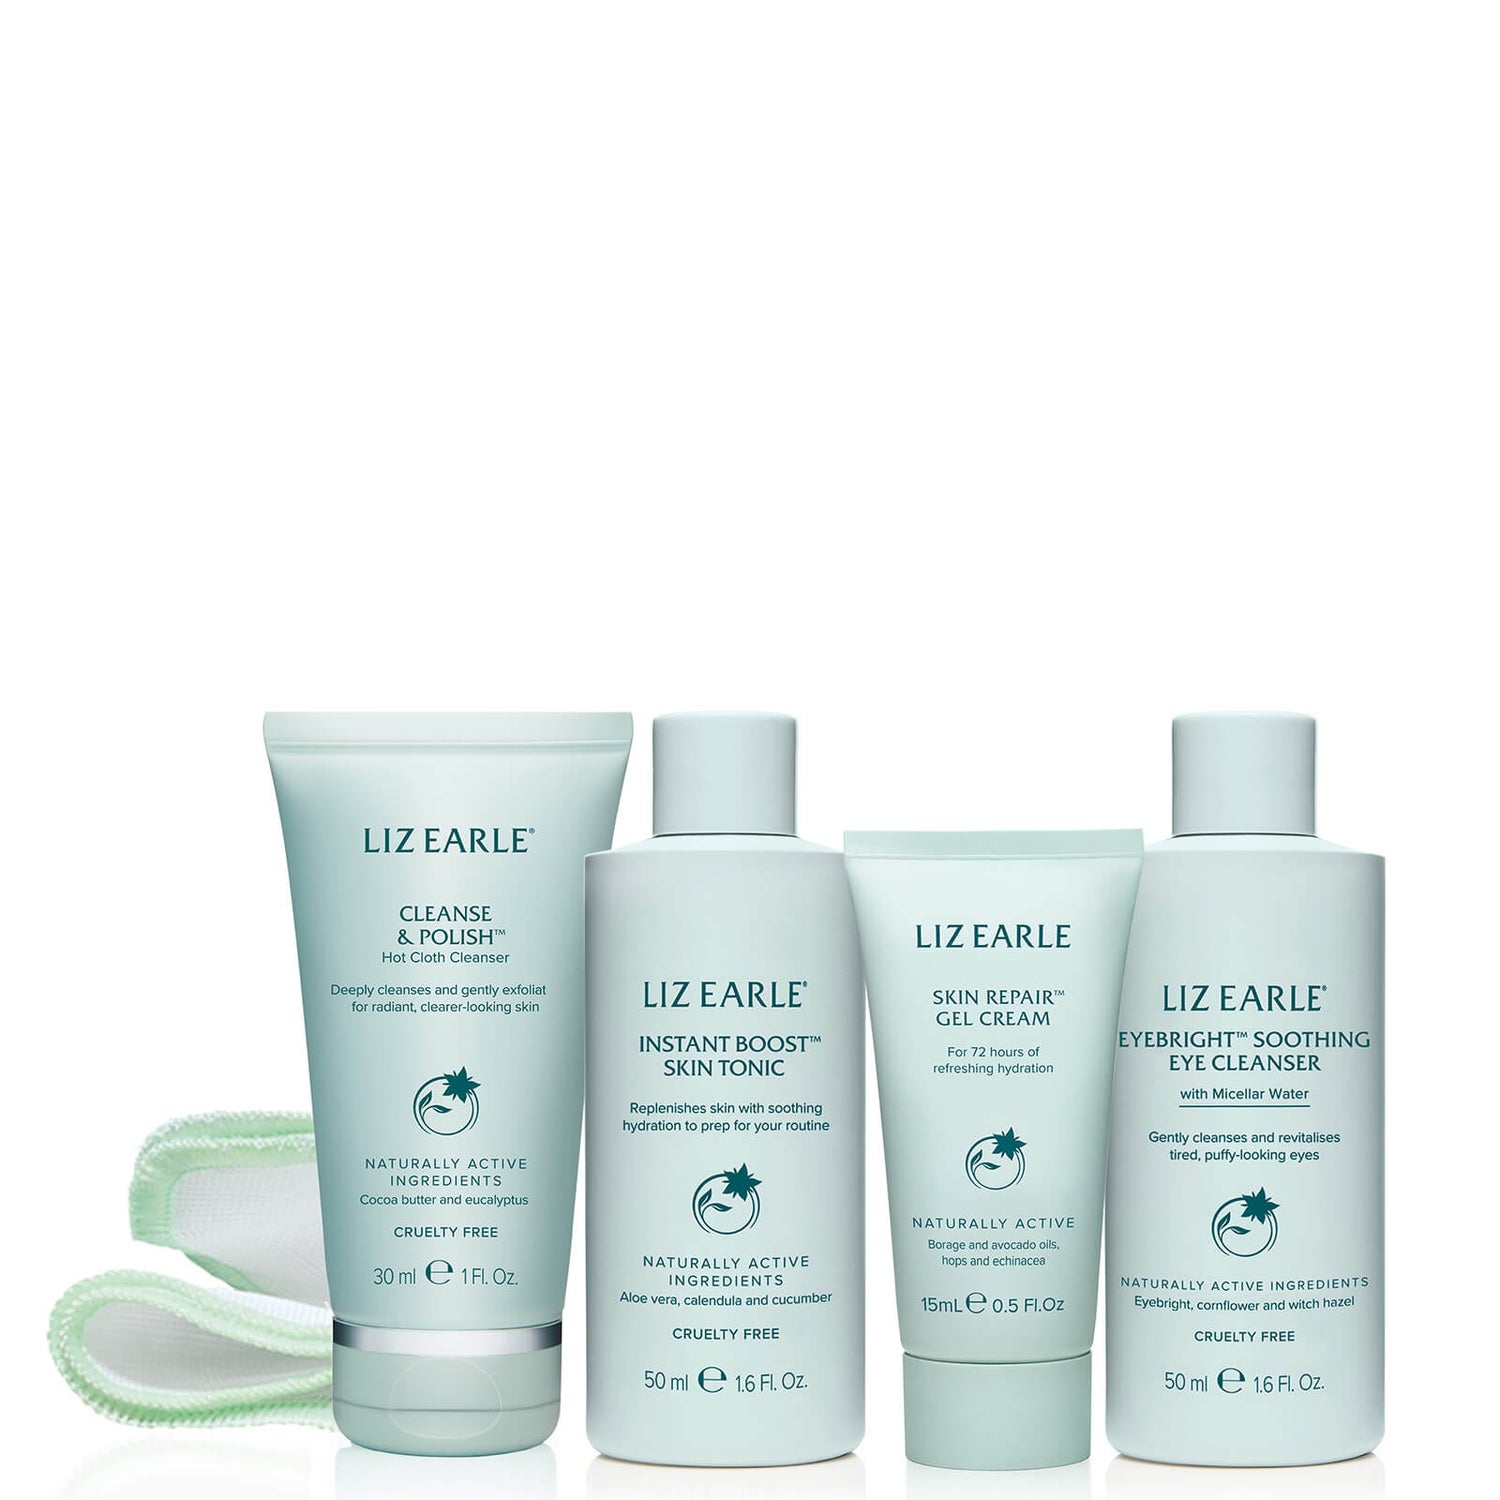 Liz Earle Your Daily Routine with Skin Repair Gel Cream Try-Me Kit